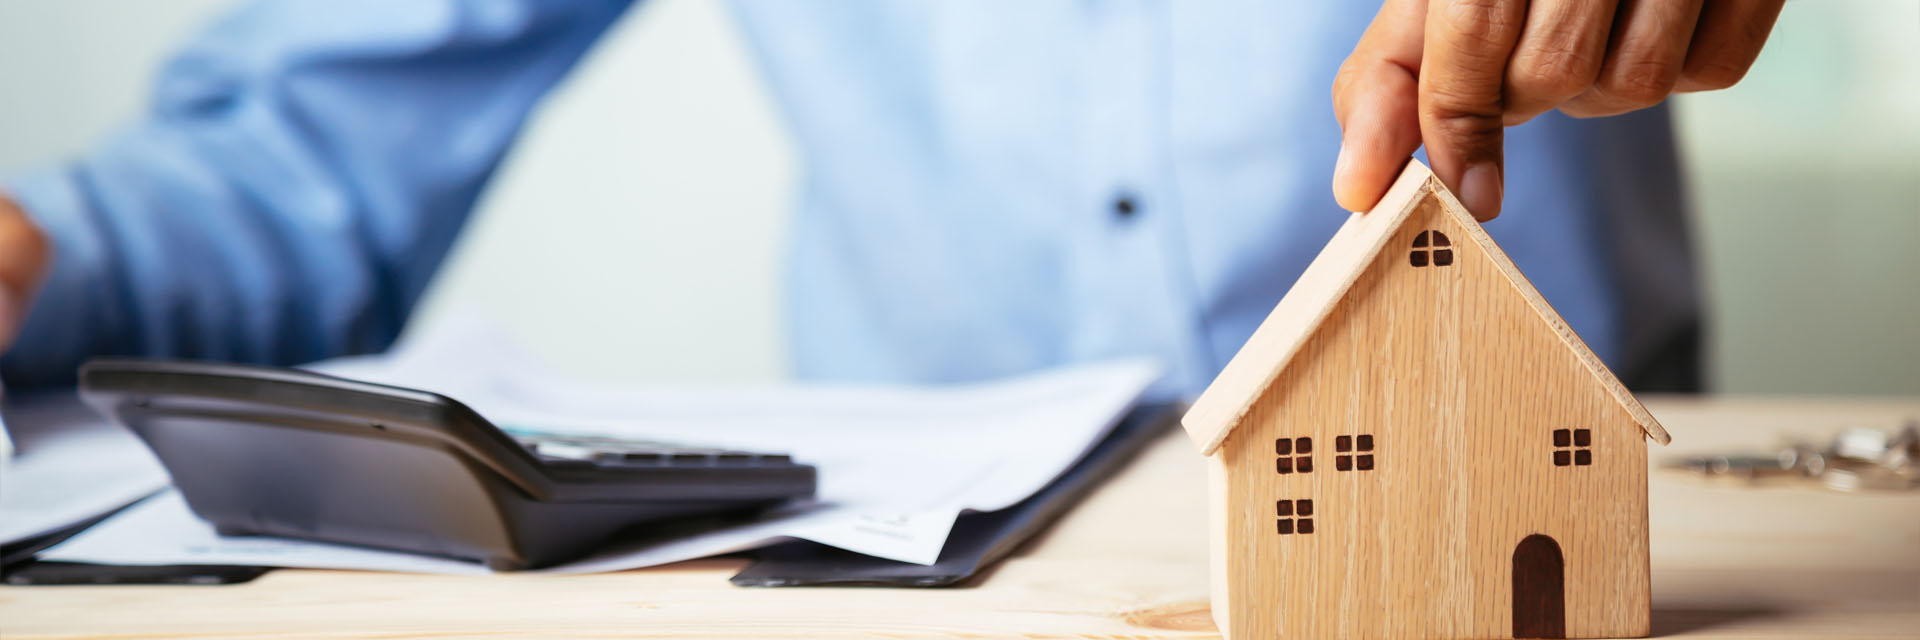 Image showing a close up of a man at his desk with some paperwork and a calculator and a hand on top of a model house